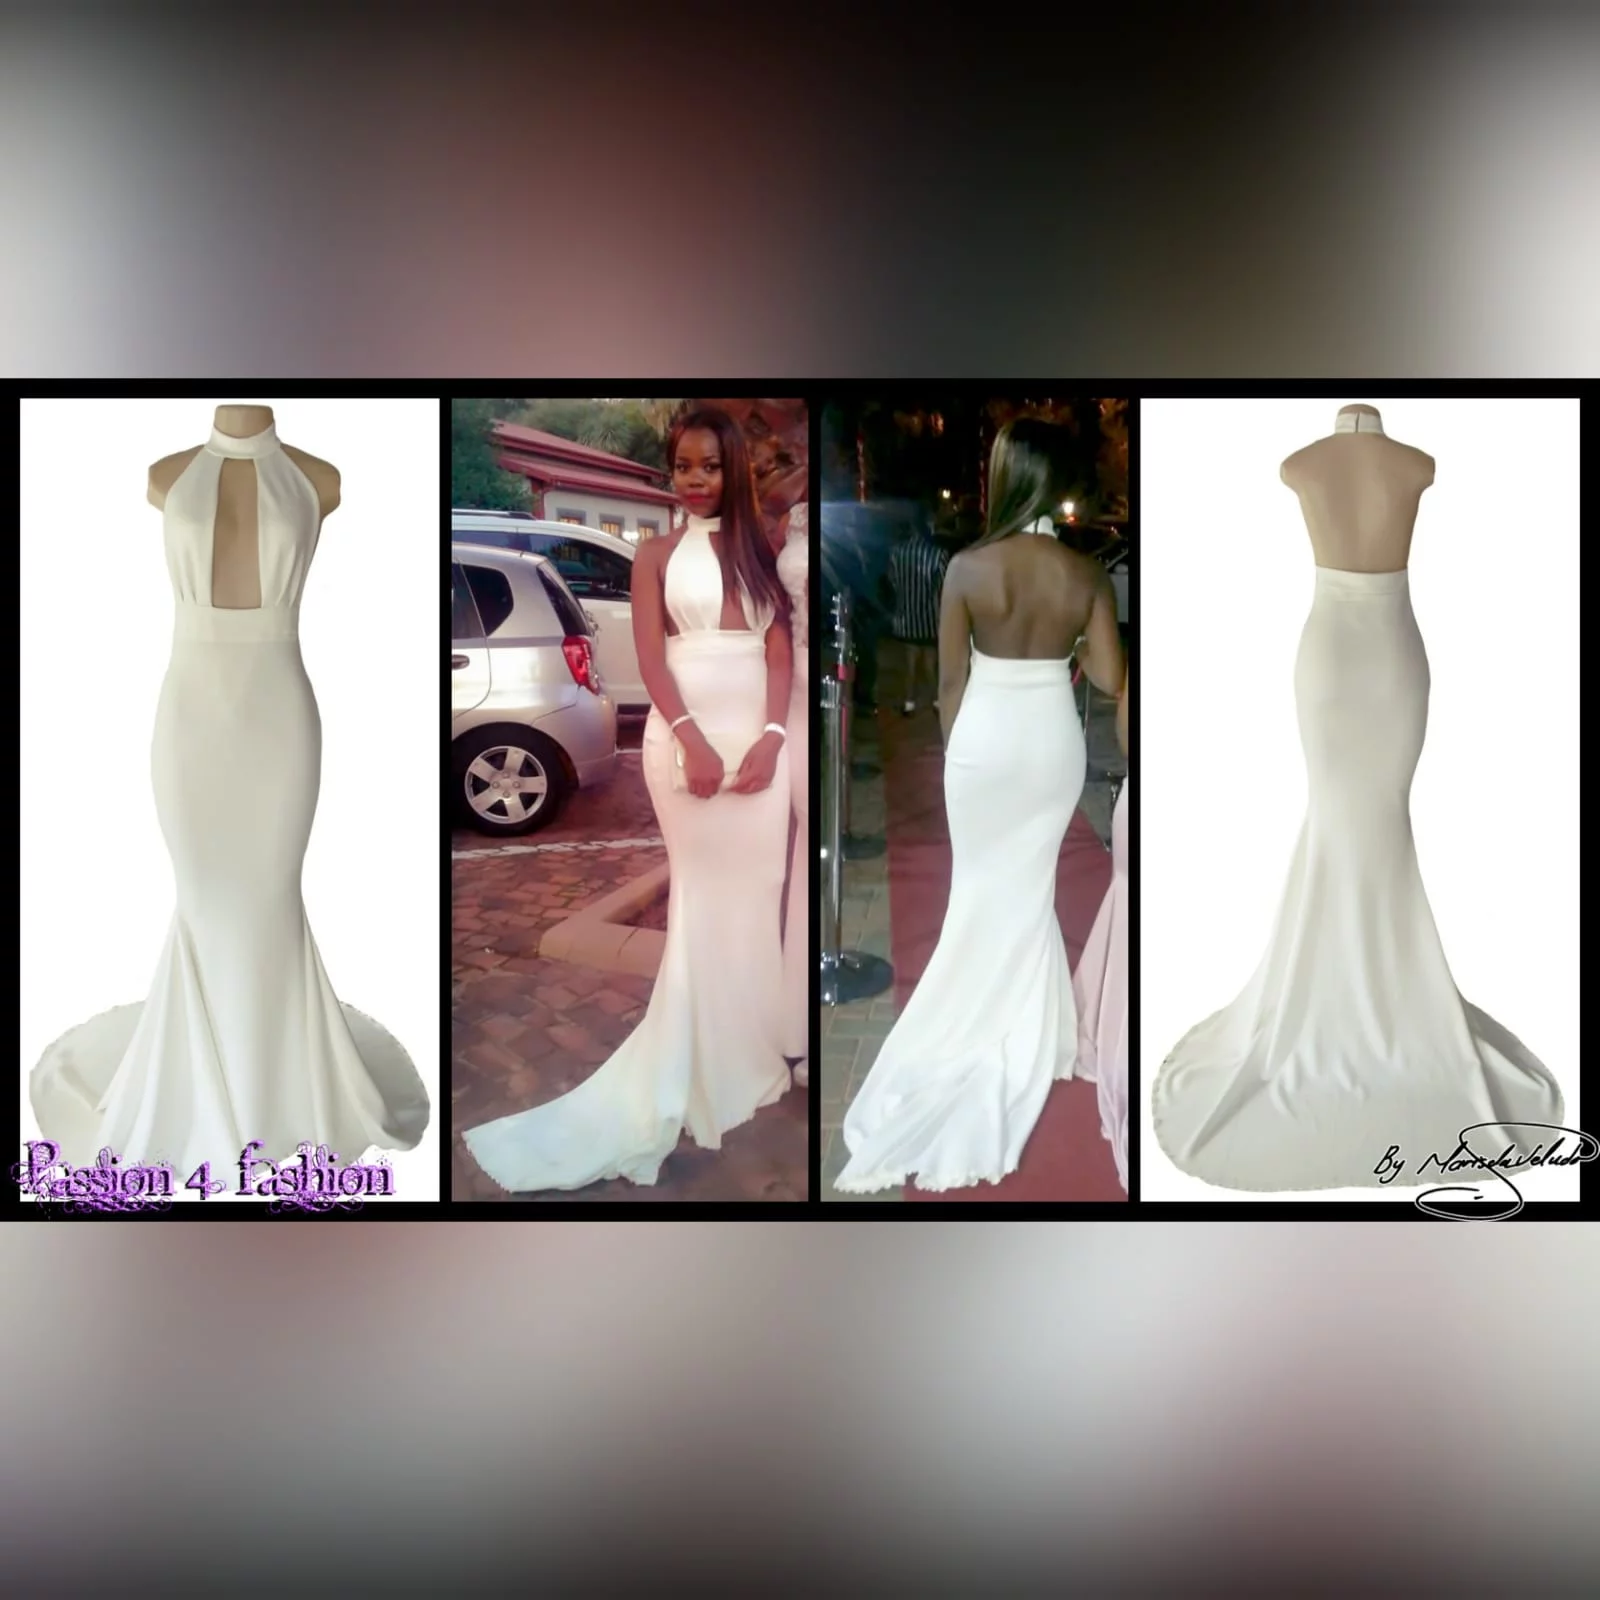 Plugning neckline ivory soft mermaid matric dance dress 2 ivory soft mermaid matric dress with a plunging and choker neckline with a naked back and a train